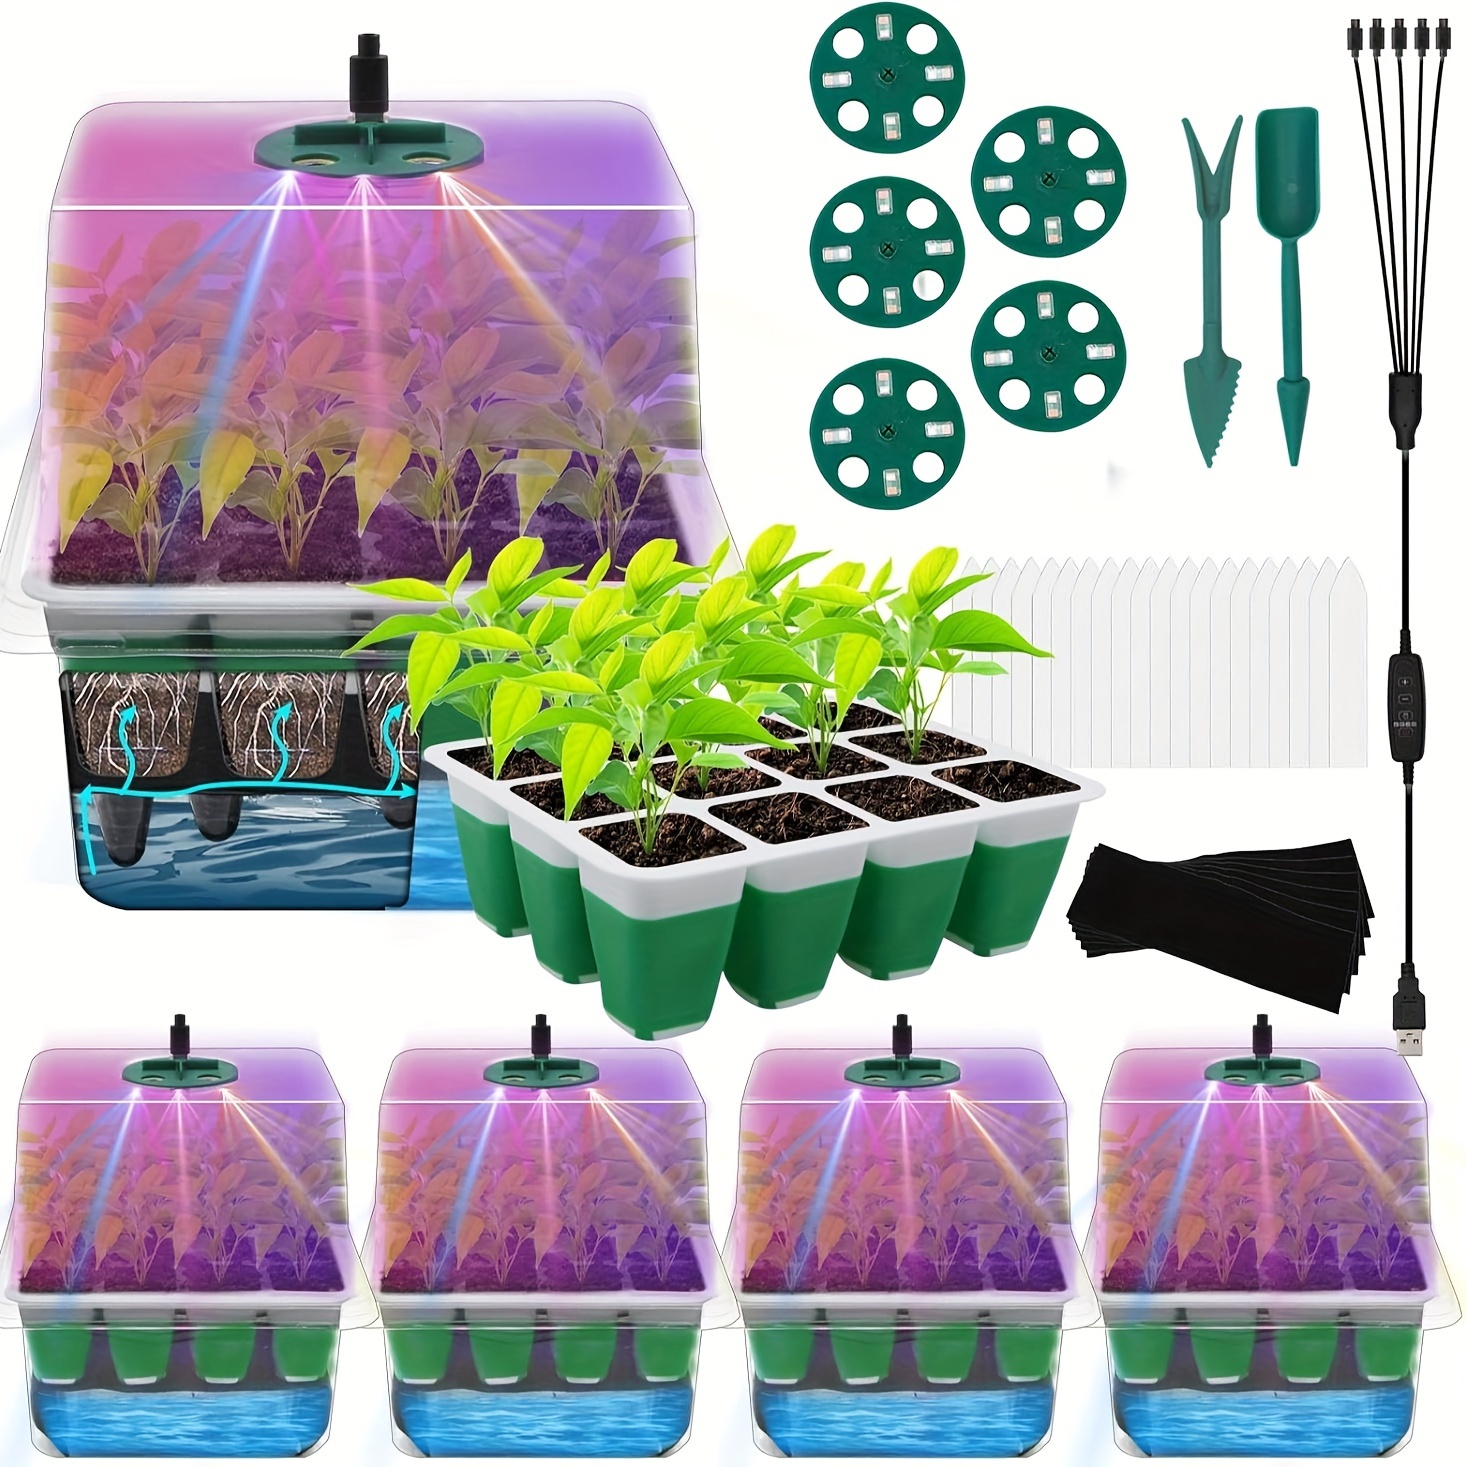 

Self Watering Seed Starter Tray With Grow Light, 5-pack 60-cell Reusable Seed Starter Kit With Soft Silicone, Plant Germination Trays With Humidity Dome For Seeding Planting Growing